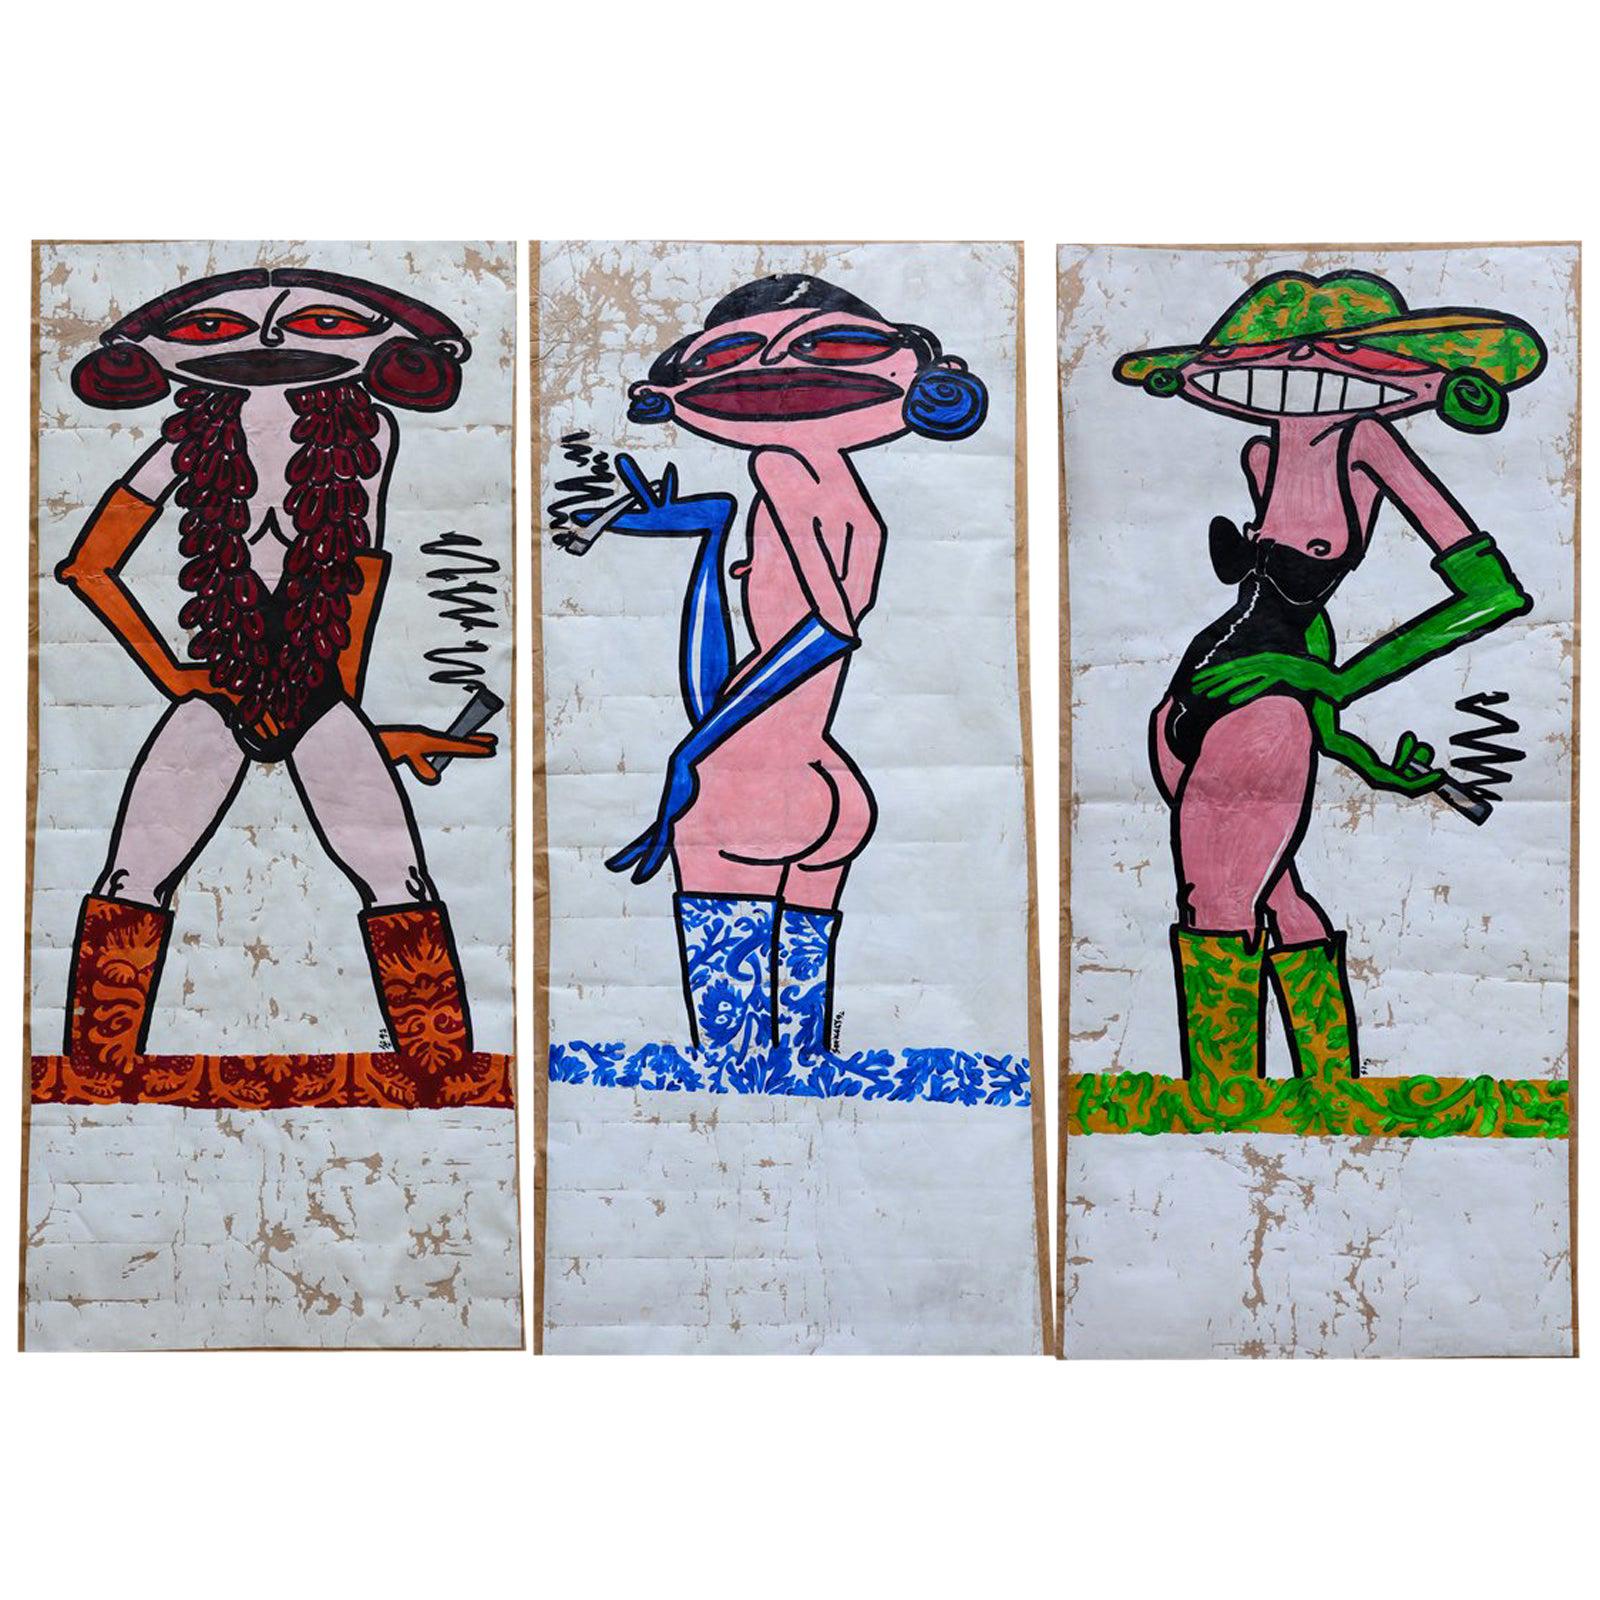 Three Original 1992 P. Szekely Paintings for Emilio Pucci